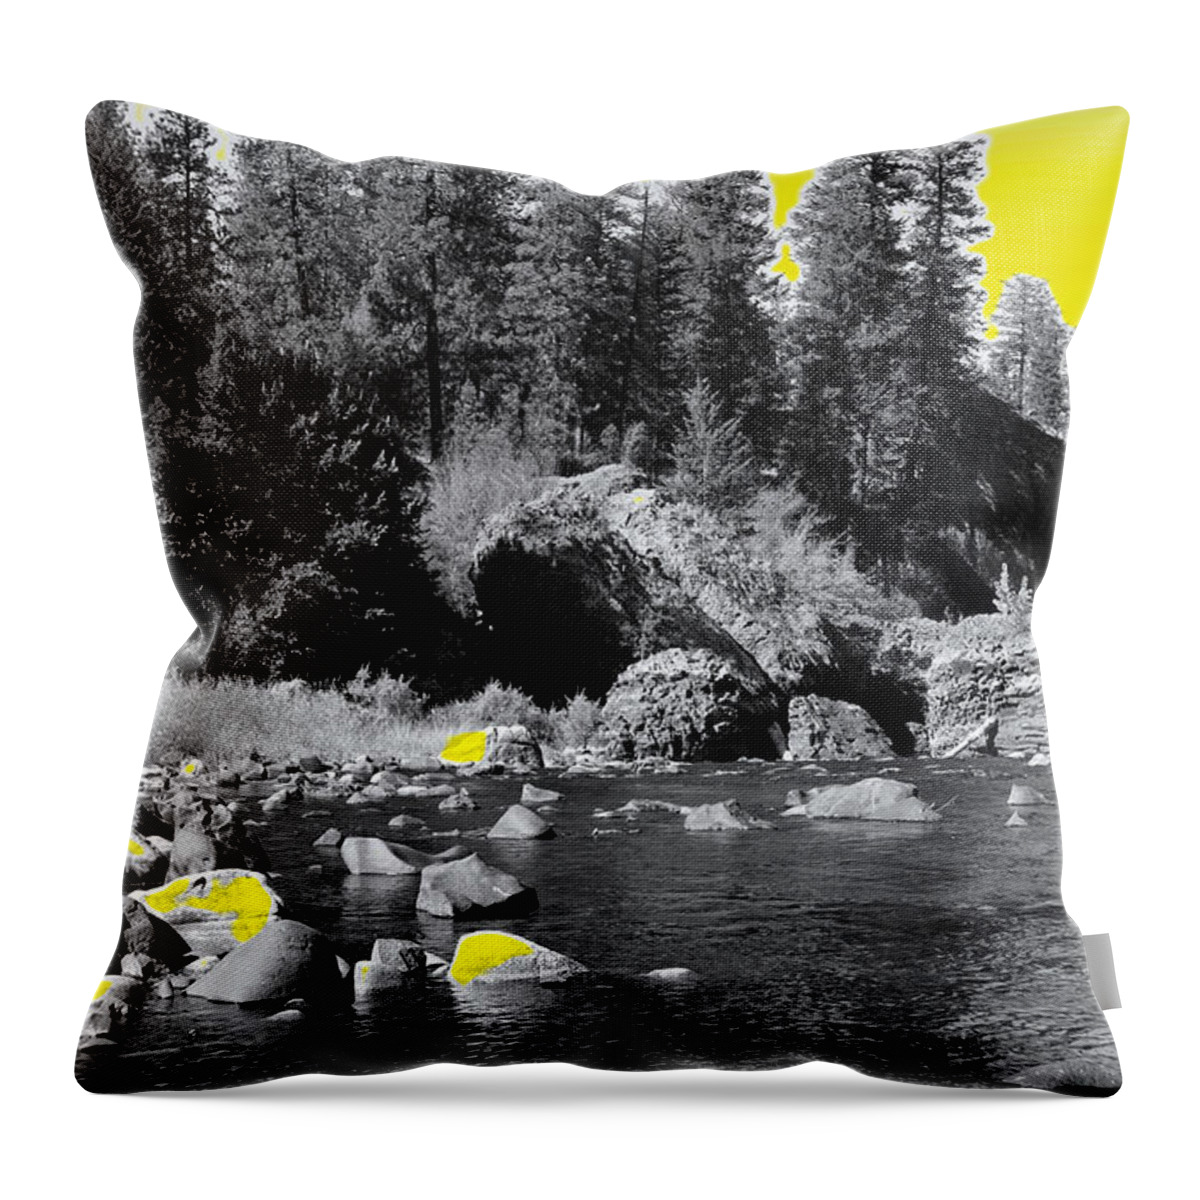 Sunrise Throw Pillow featuring the photograph The Dawn of Colors by Ben Upham III